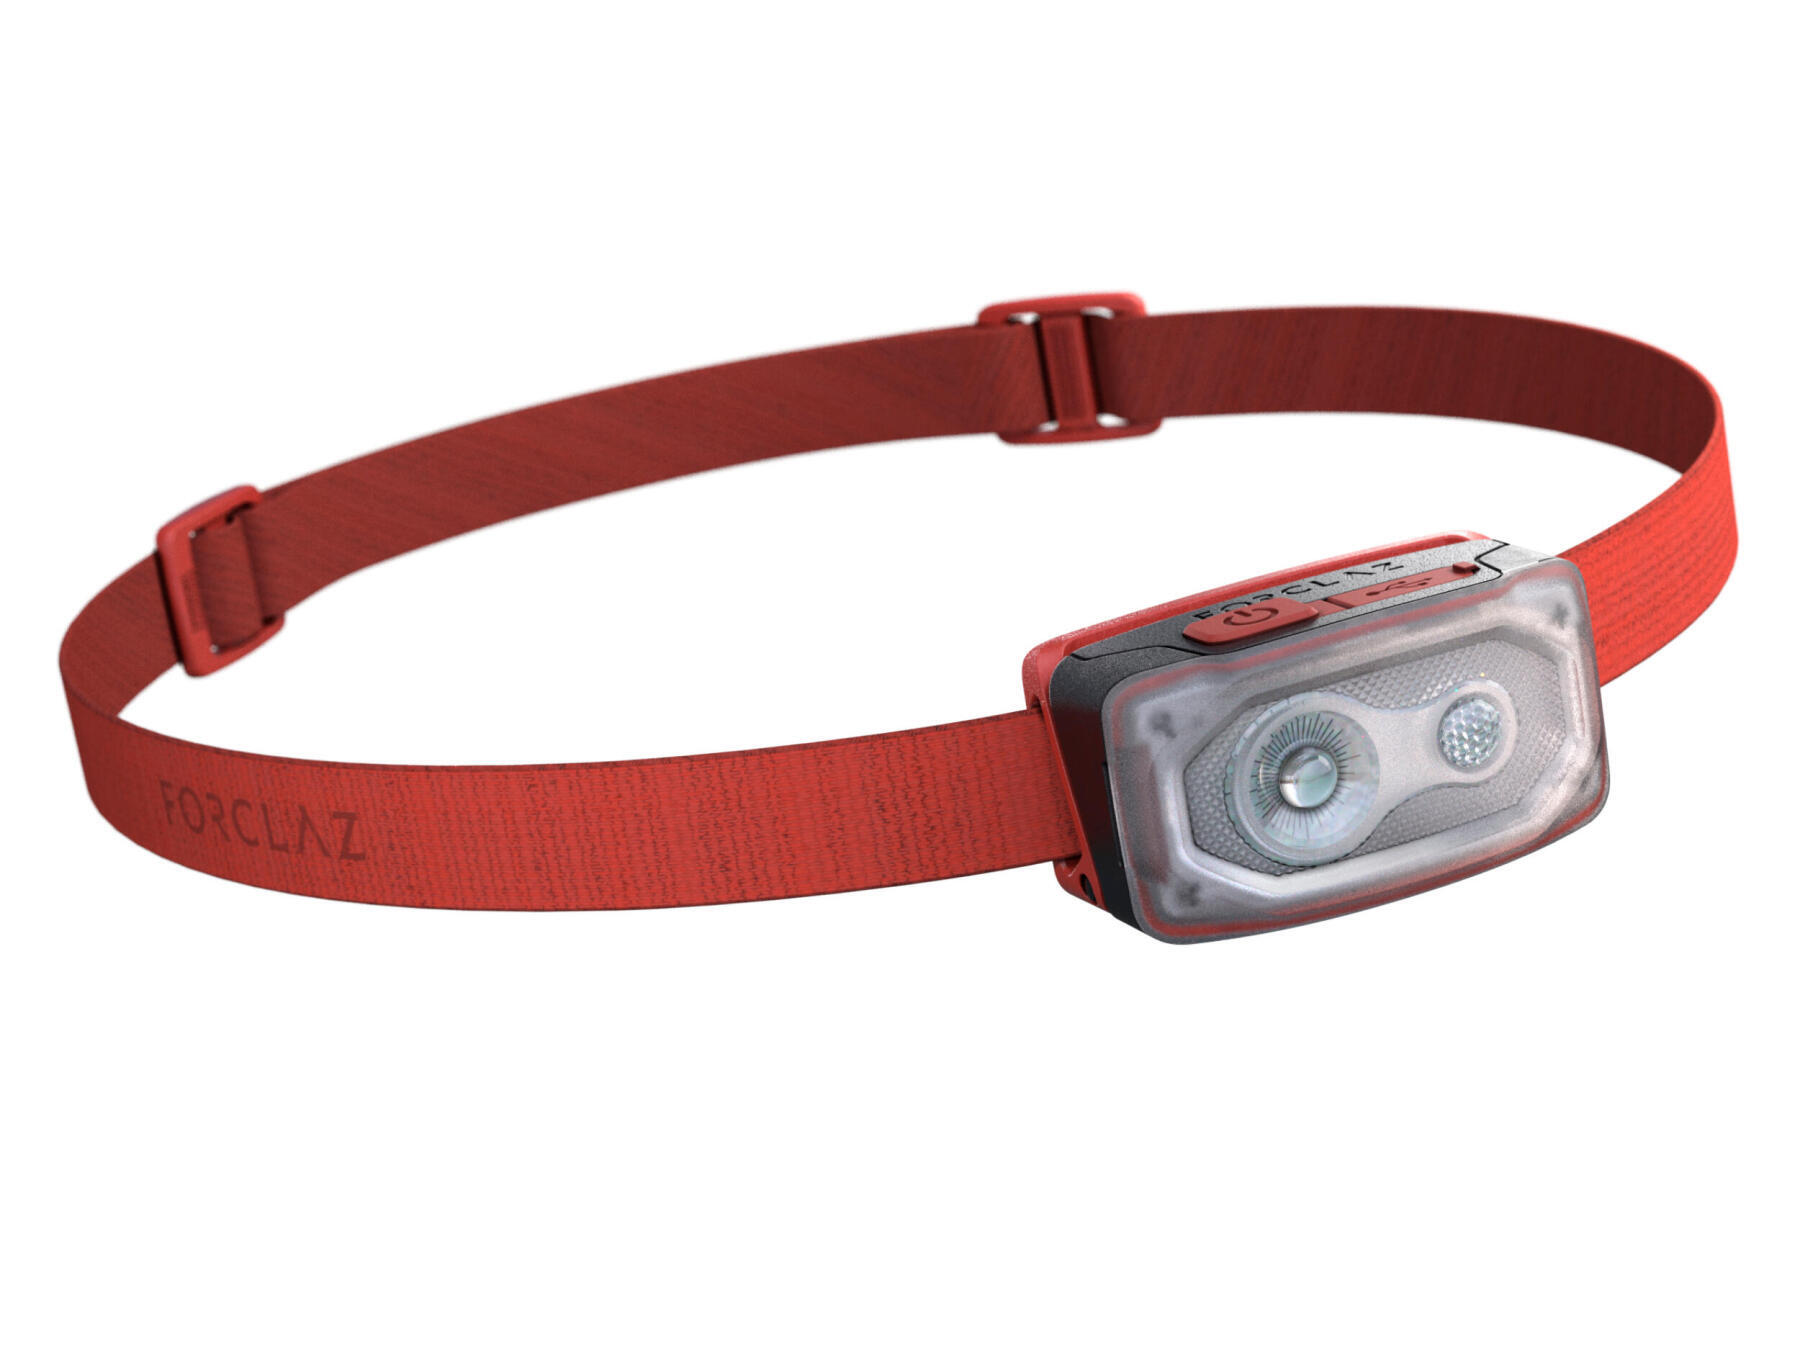 Maintaining and repairing your HL900 USB V2 lm headlamp